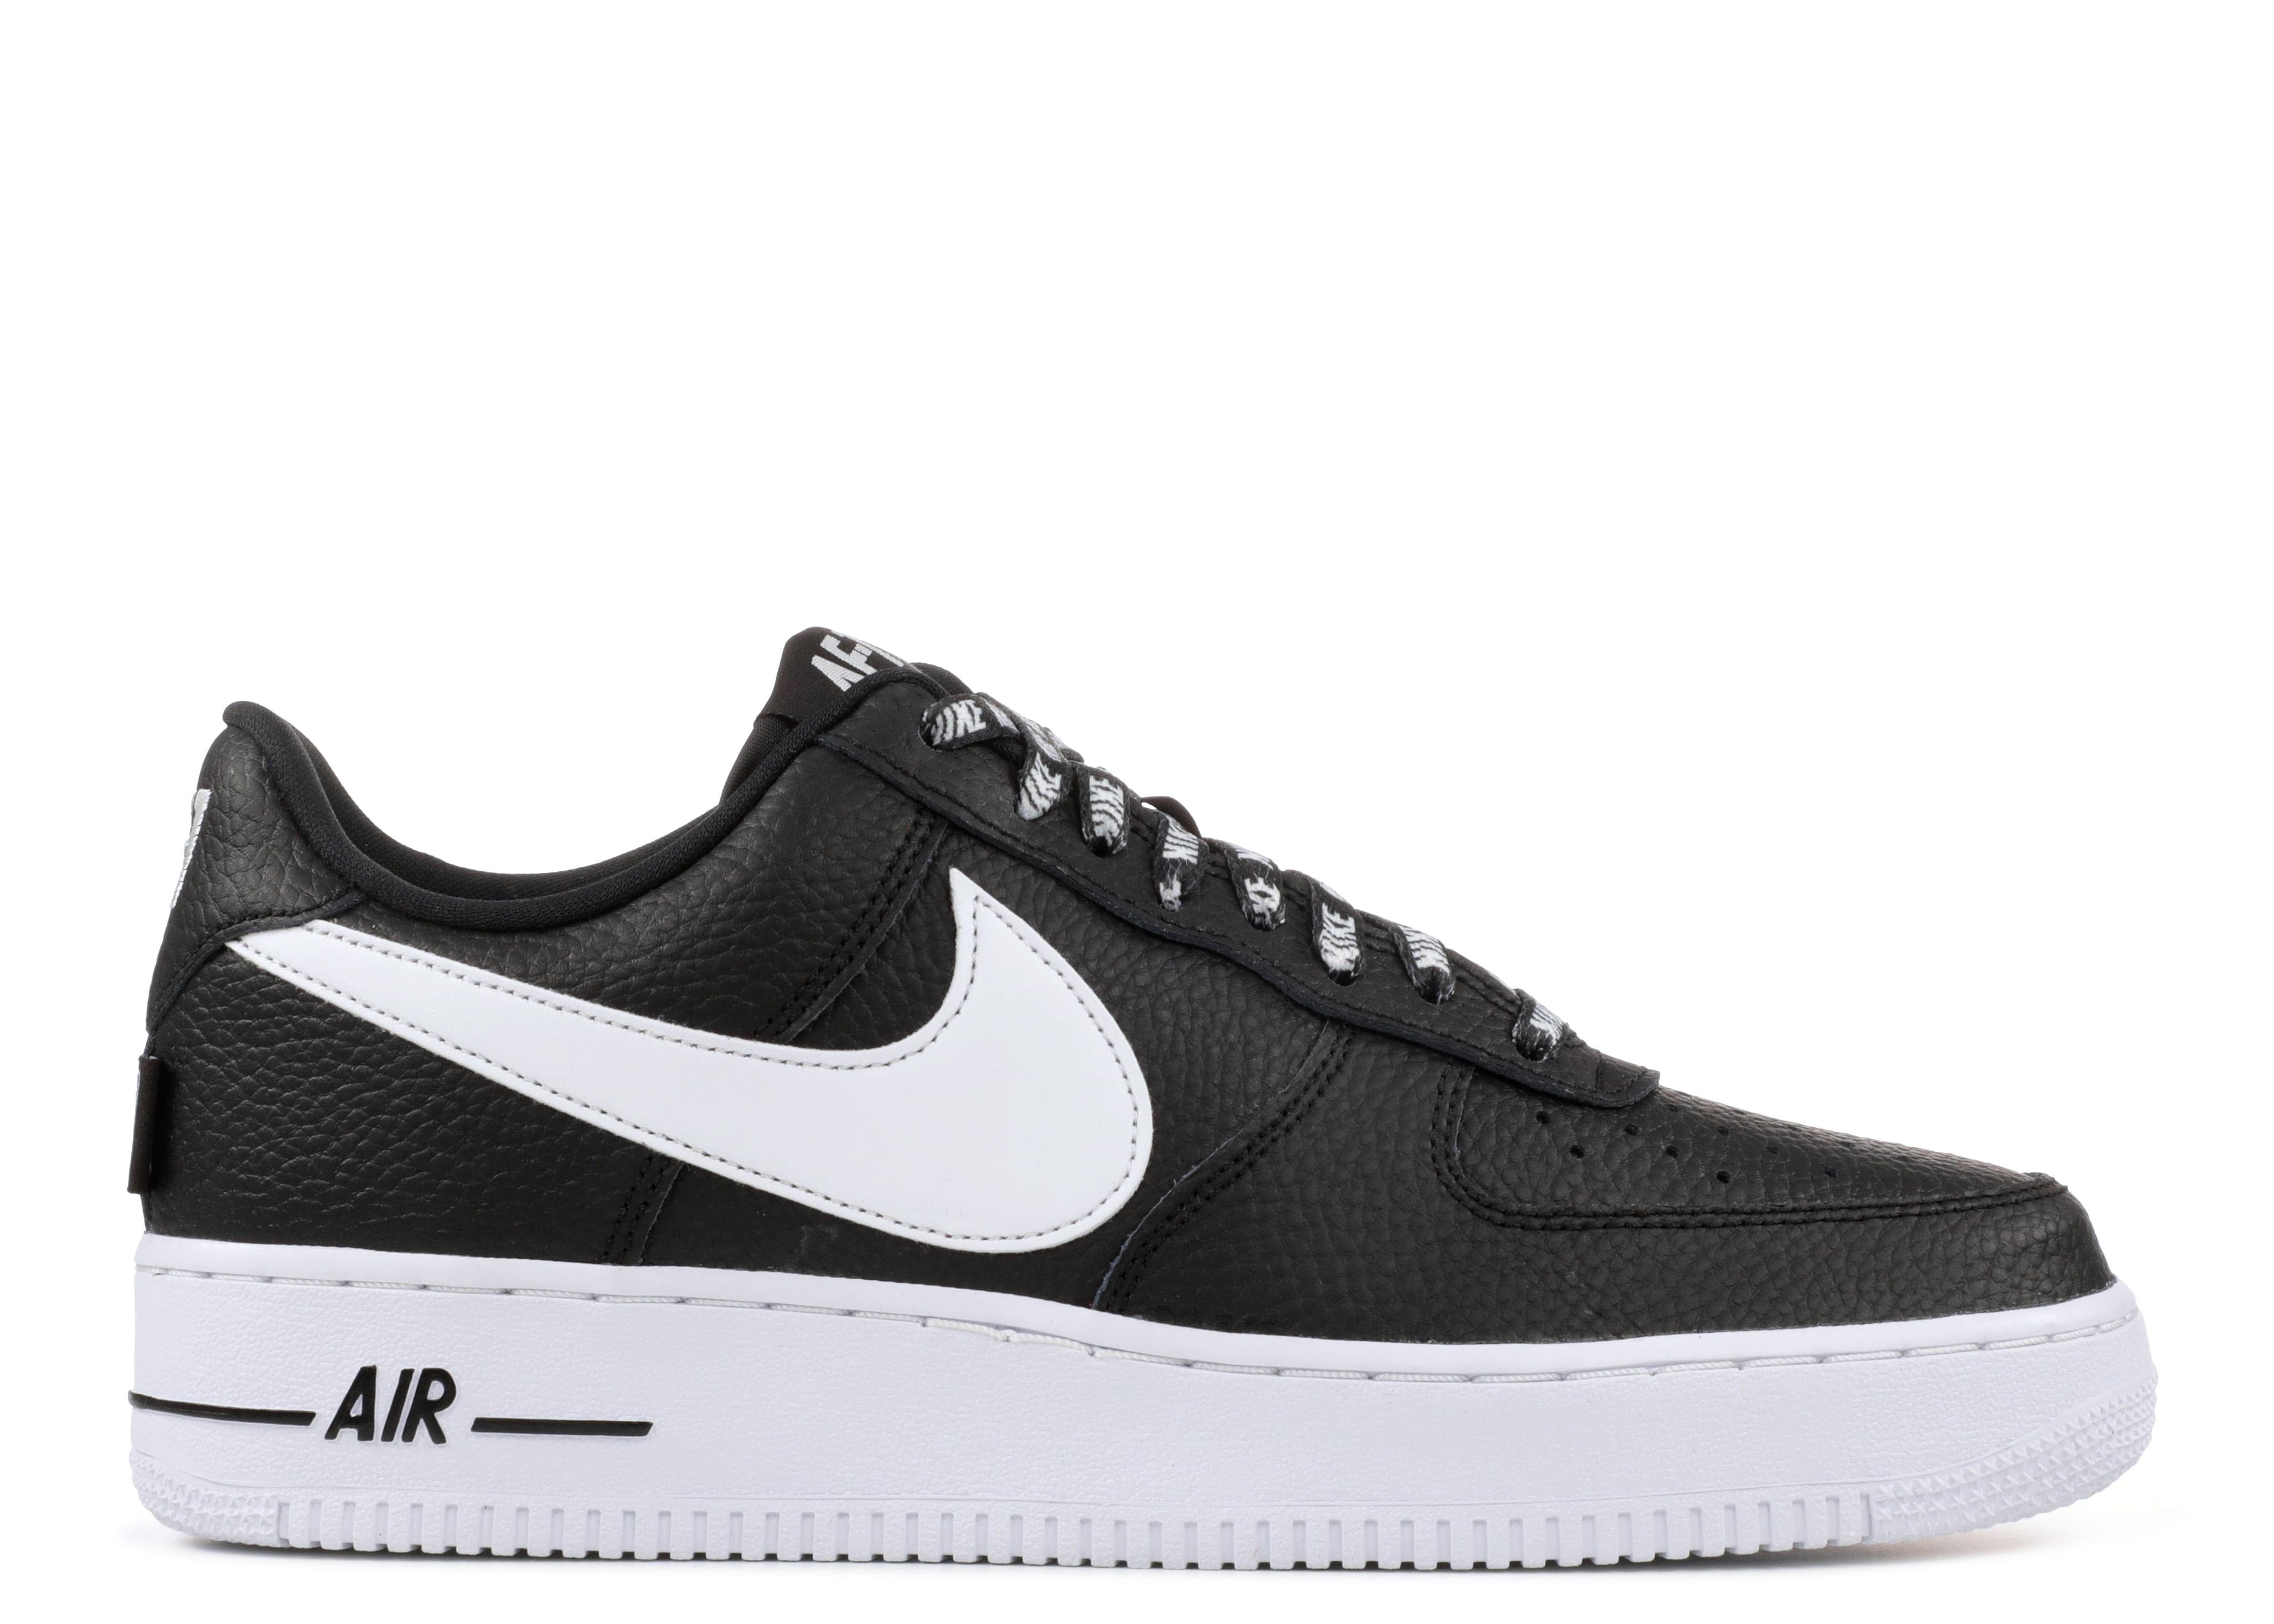 nike air force 1 statement game white